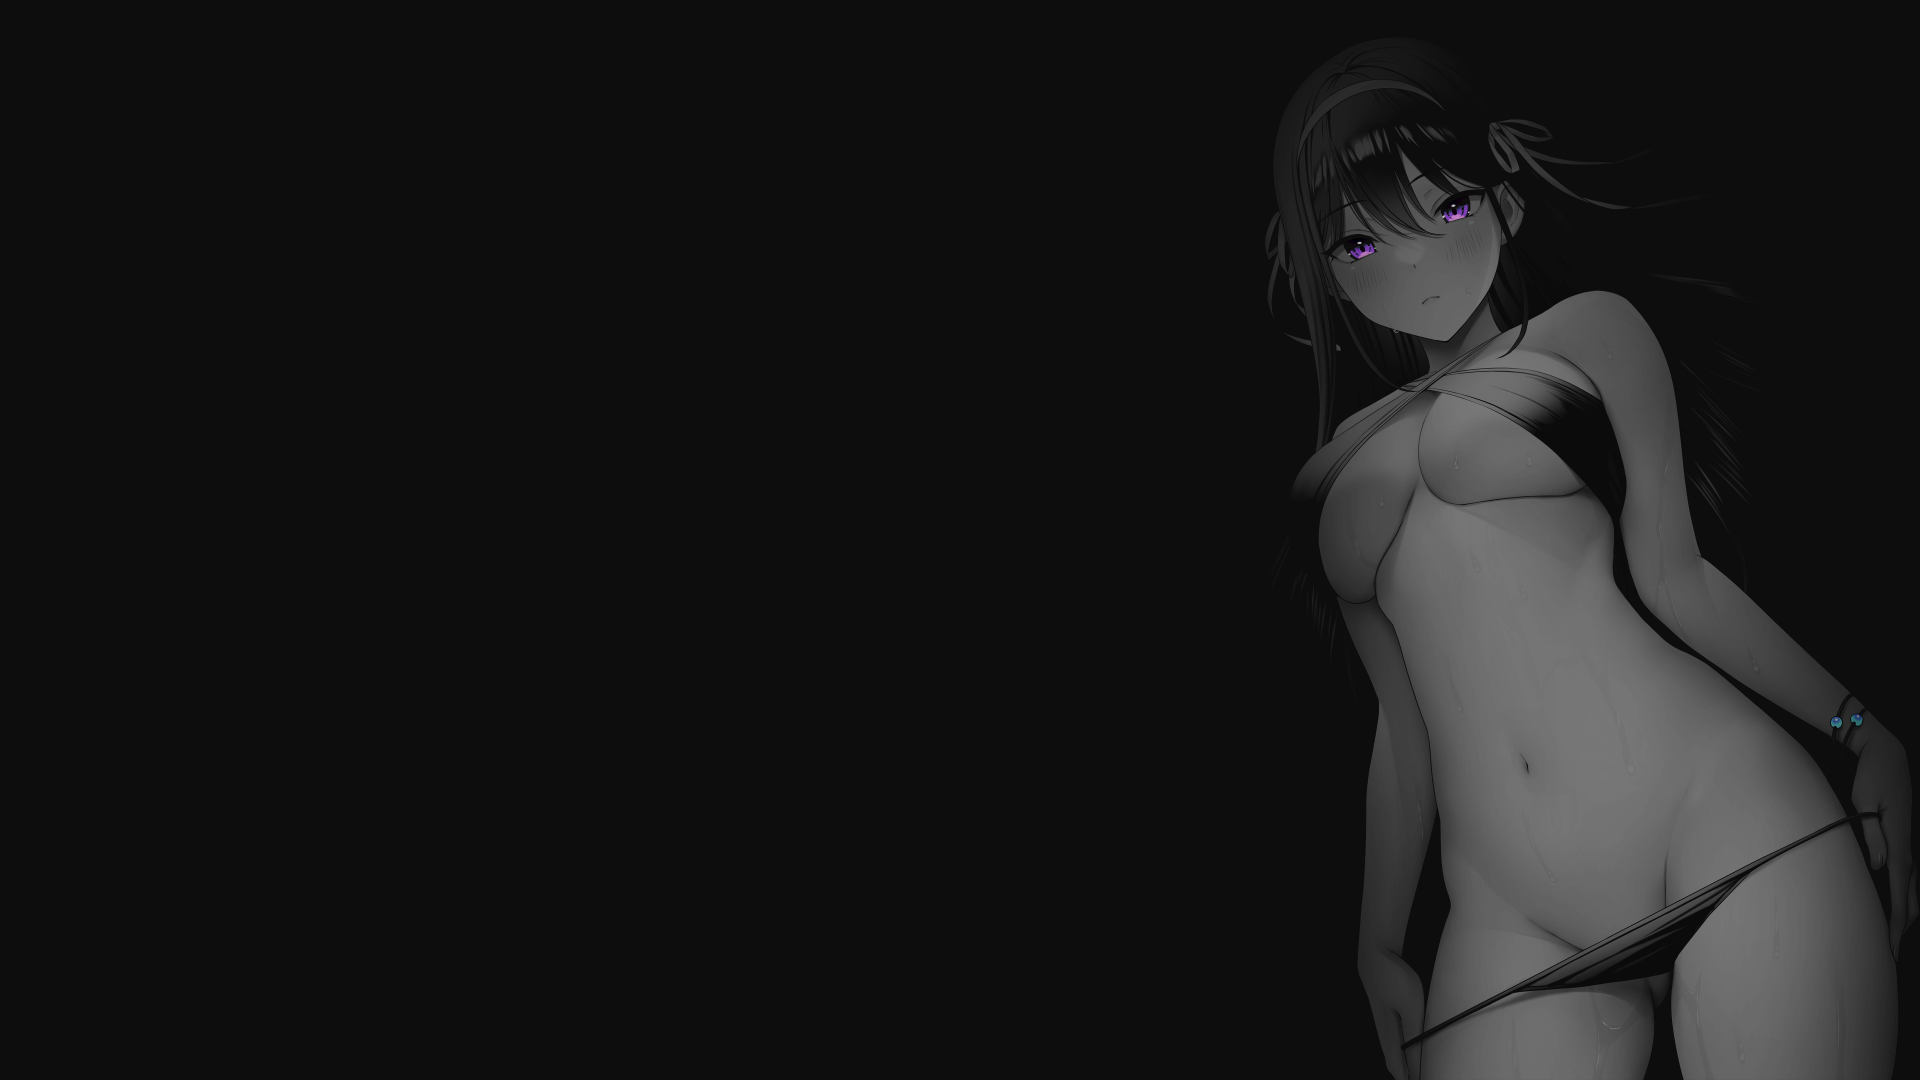 Anime 1920x1080 black background dark background simple background anime girls selective coloring swimwear big boobs Spy x Family Yor Forger